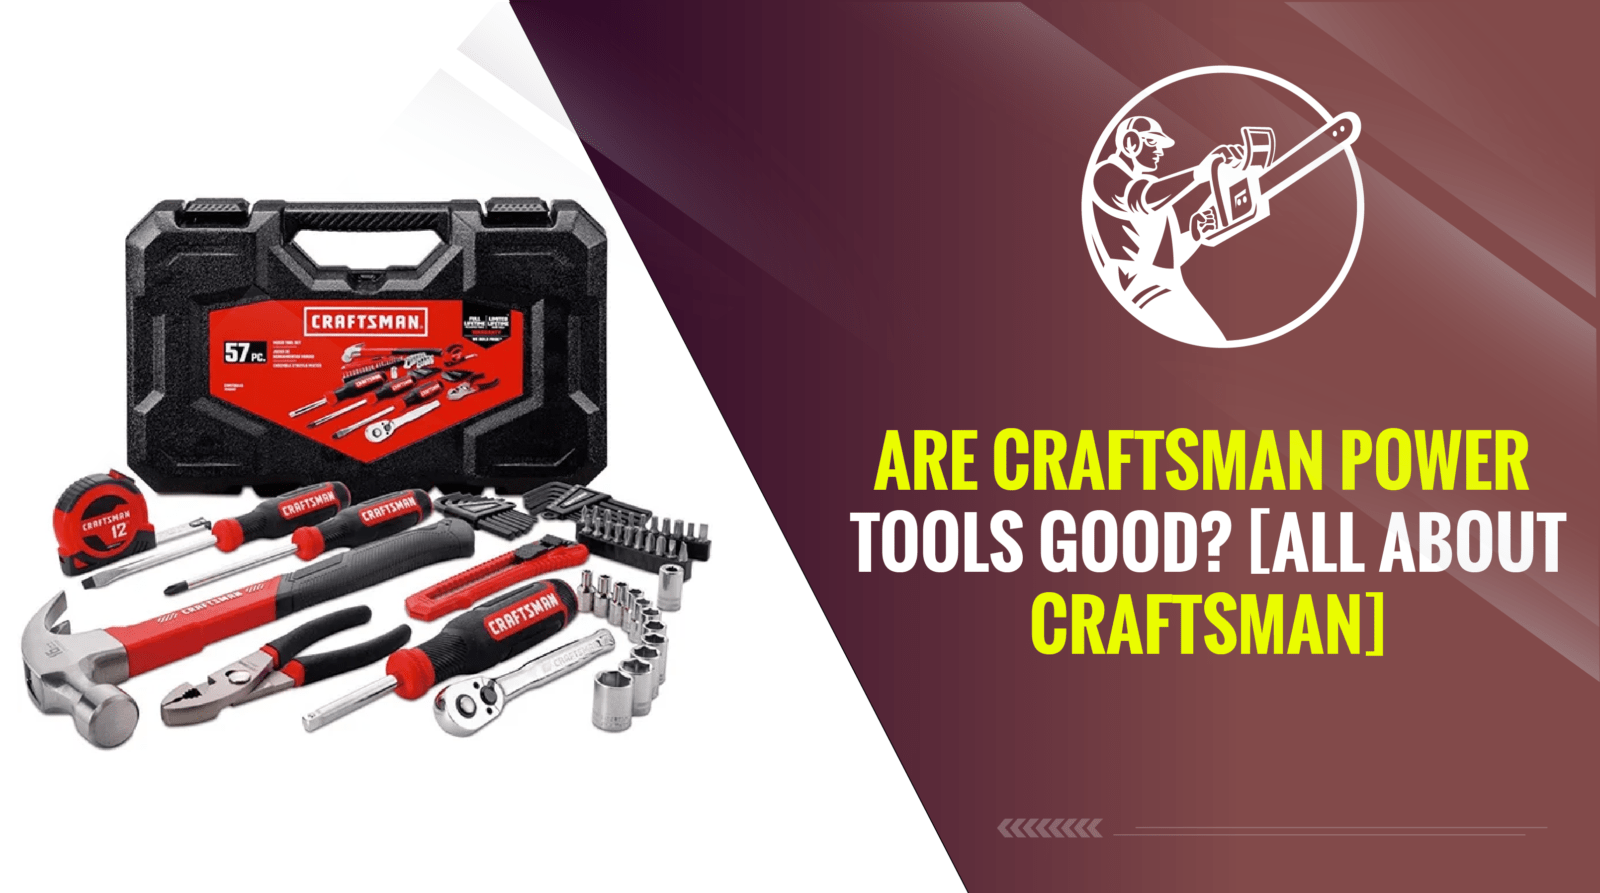 Are Craftsman Power Tools Good [All About Craftsman]